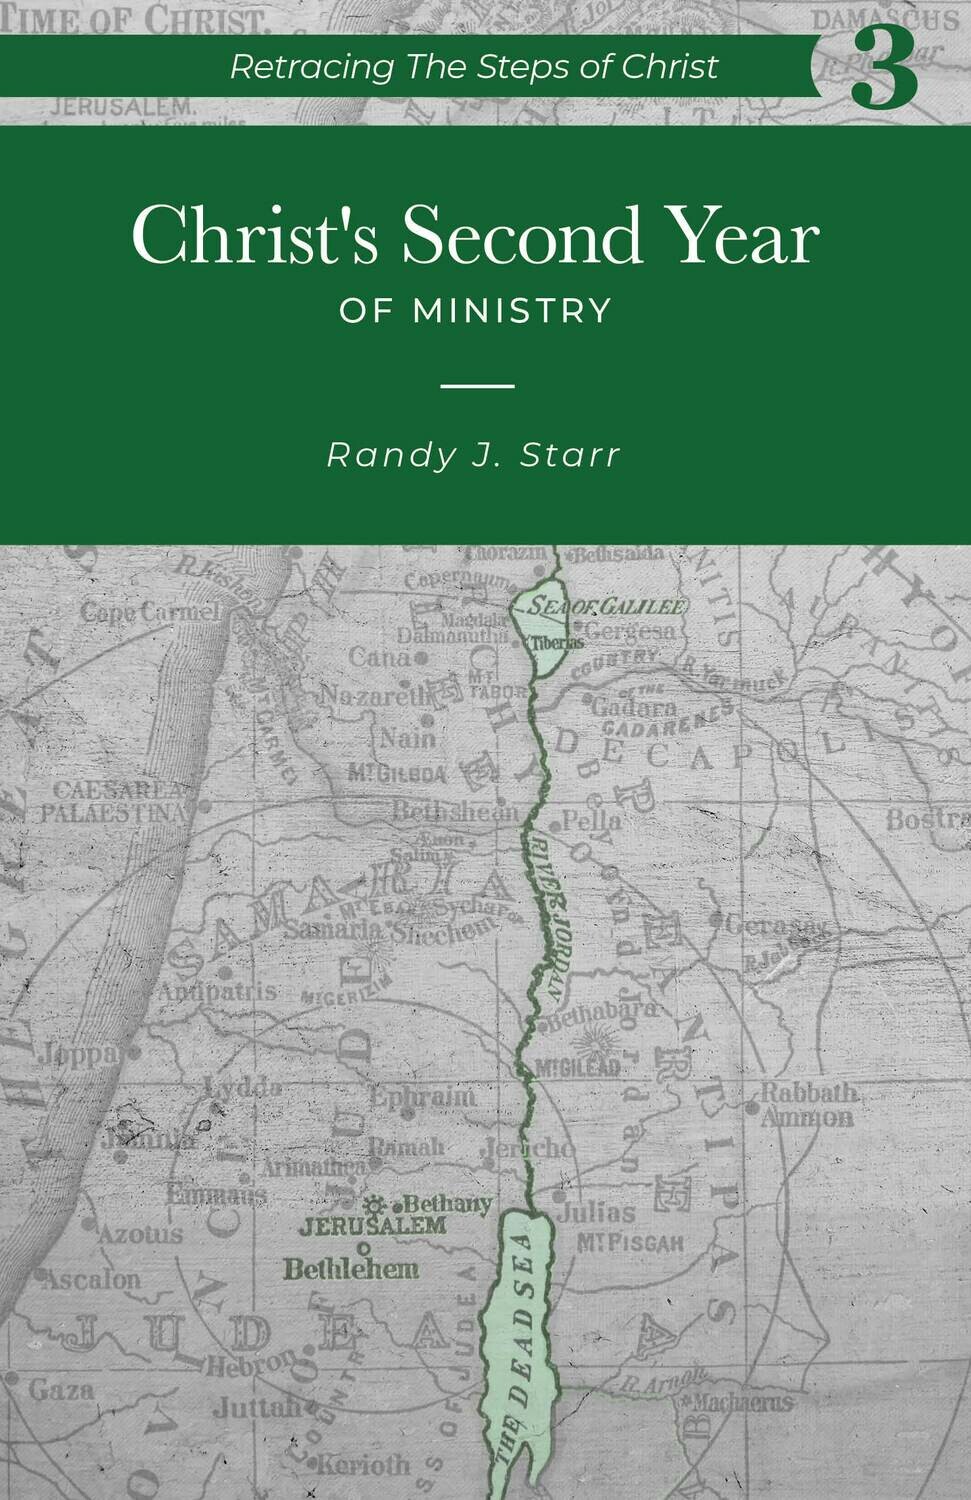 Retracing the Steps of Christ, v. 3 of 6 volumes- Christ's Second Year of Ministry